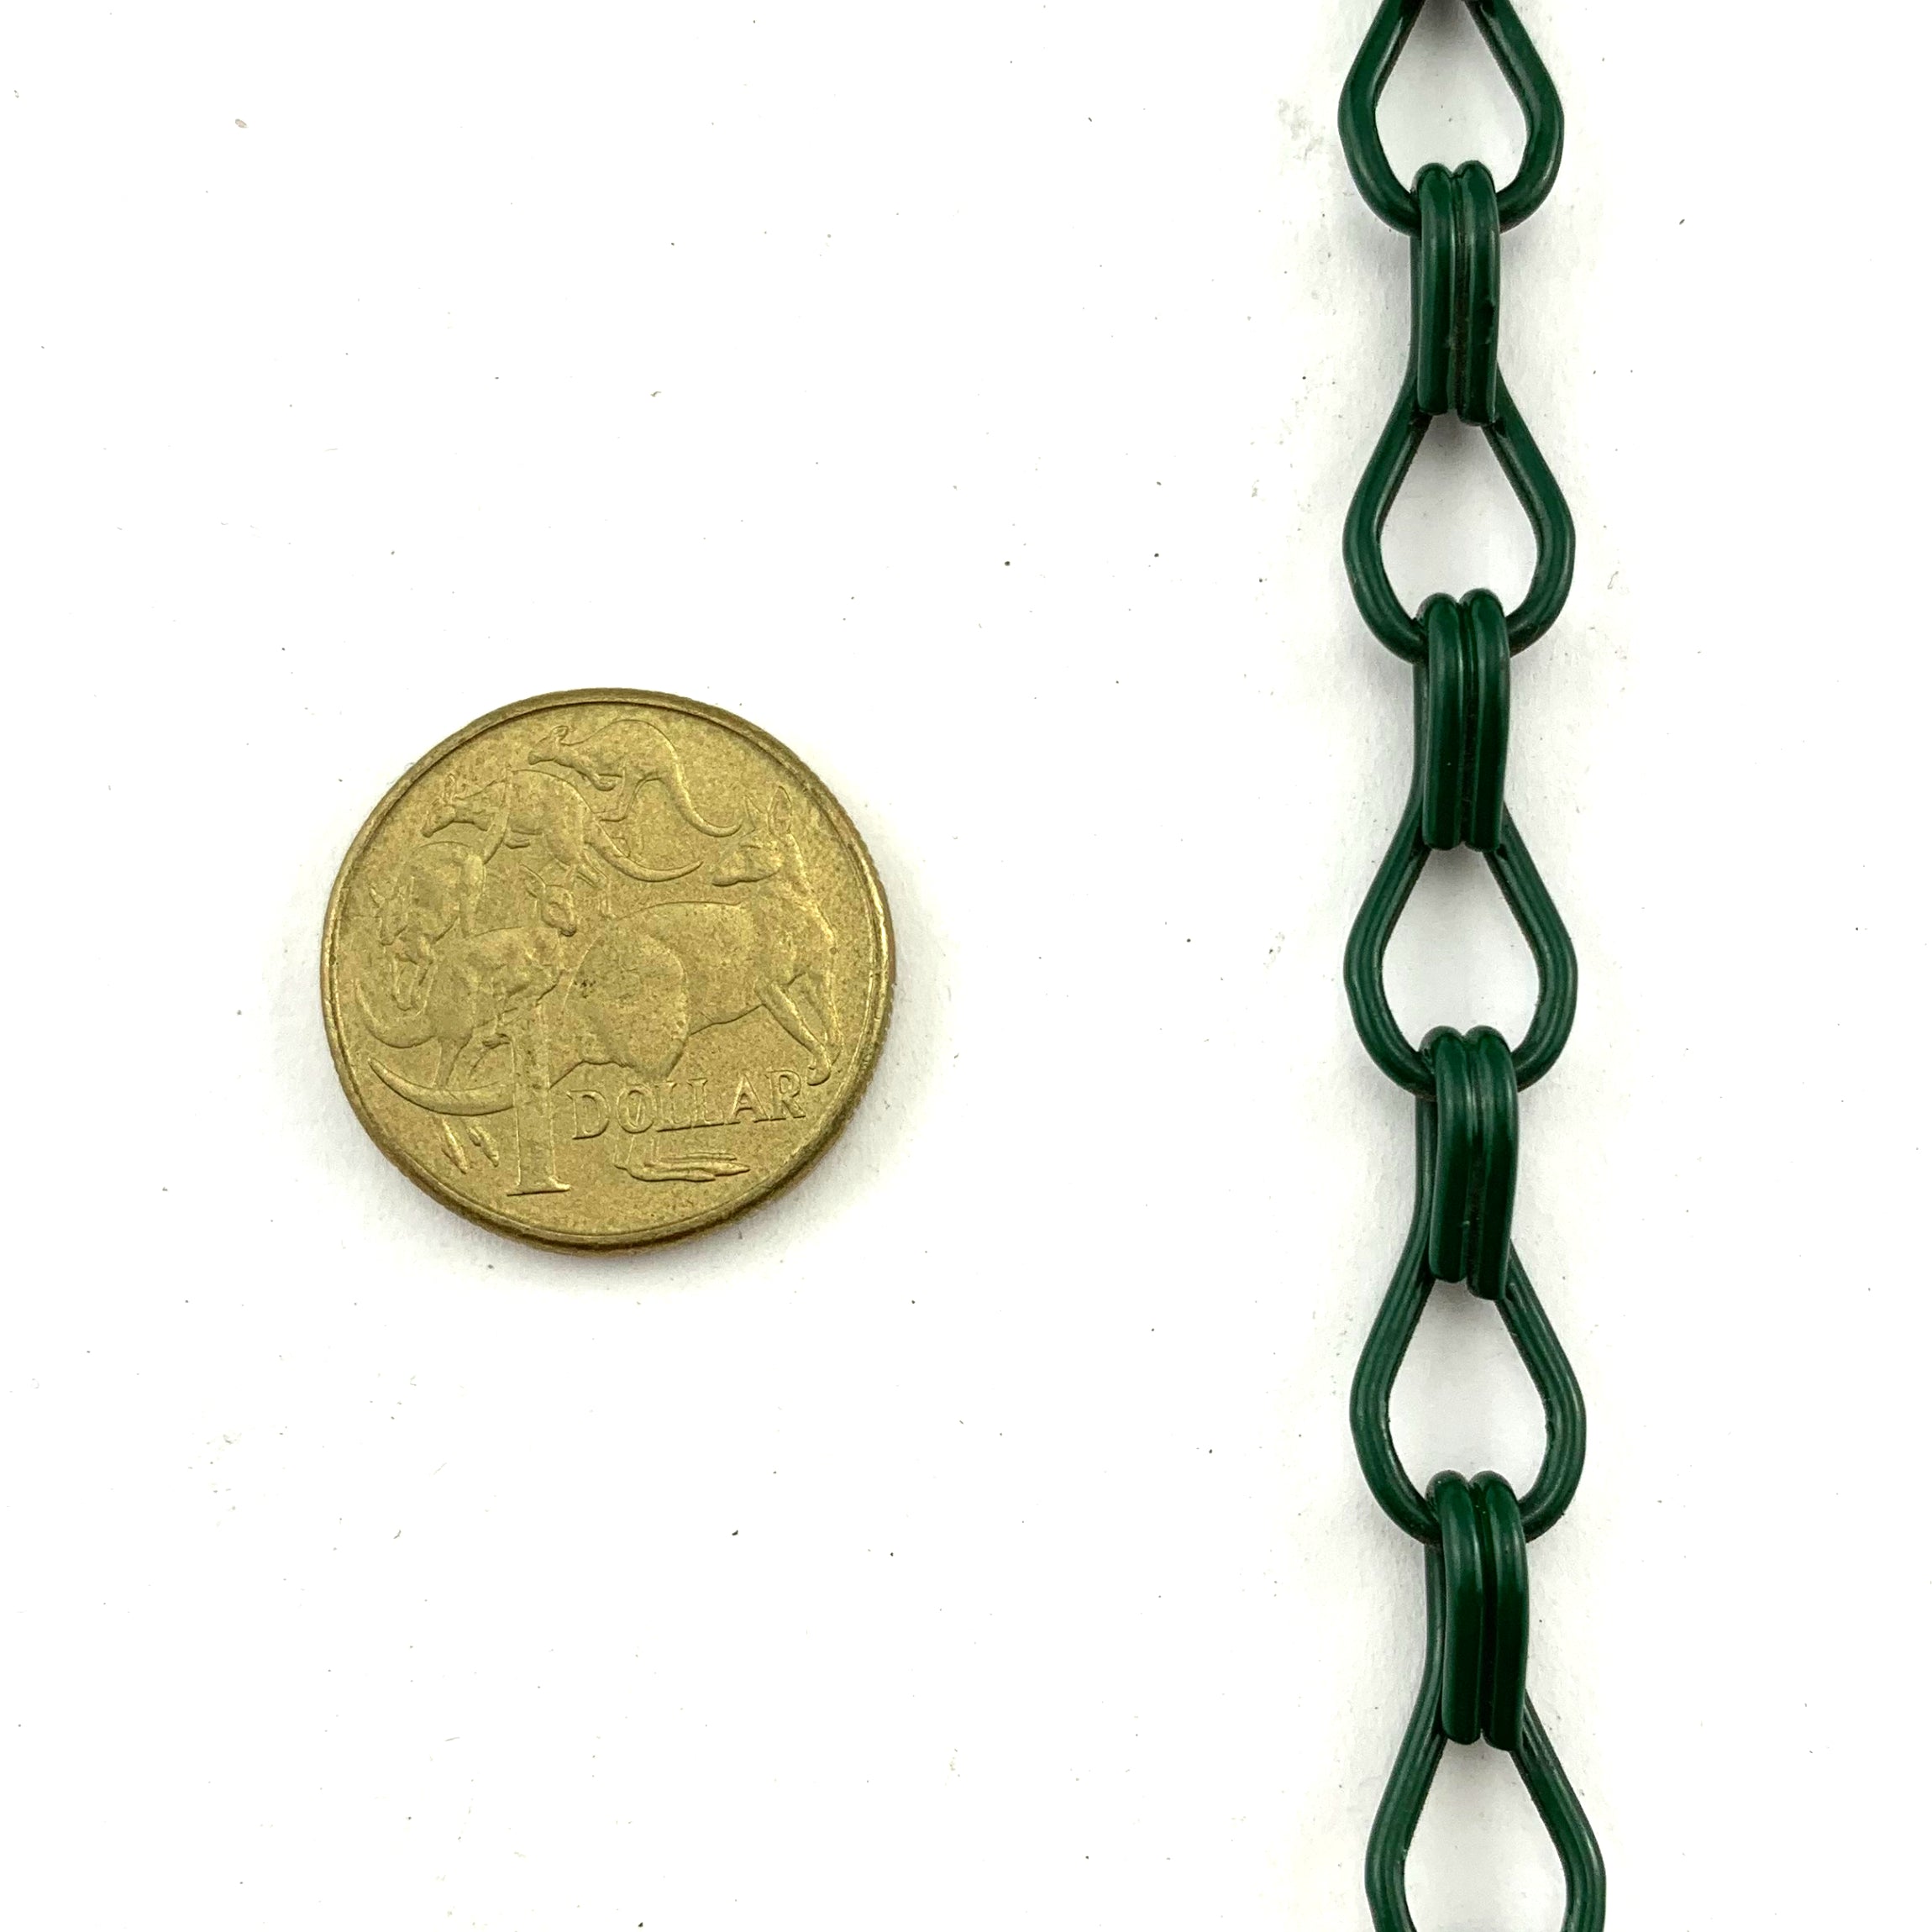 Commercial grade double jack chain in green powder coated finish, size: 1.6mm. Melbourne Australia.